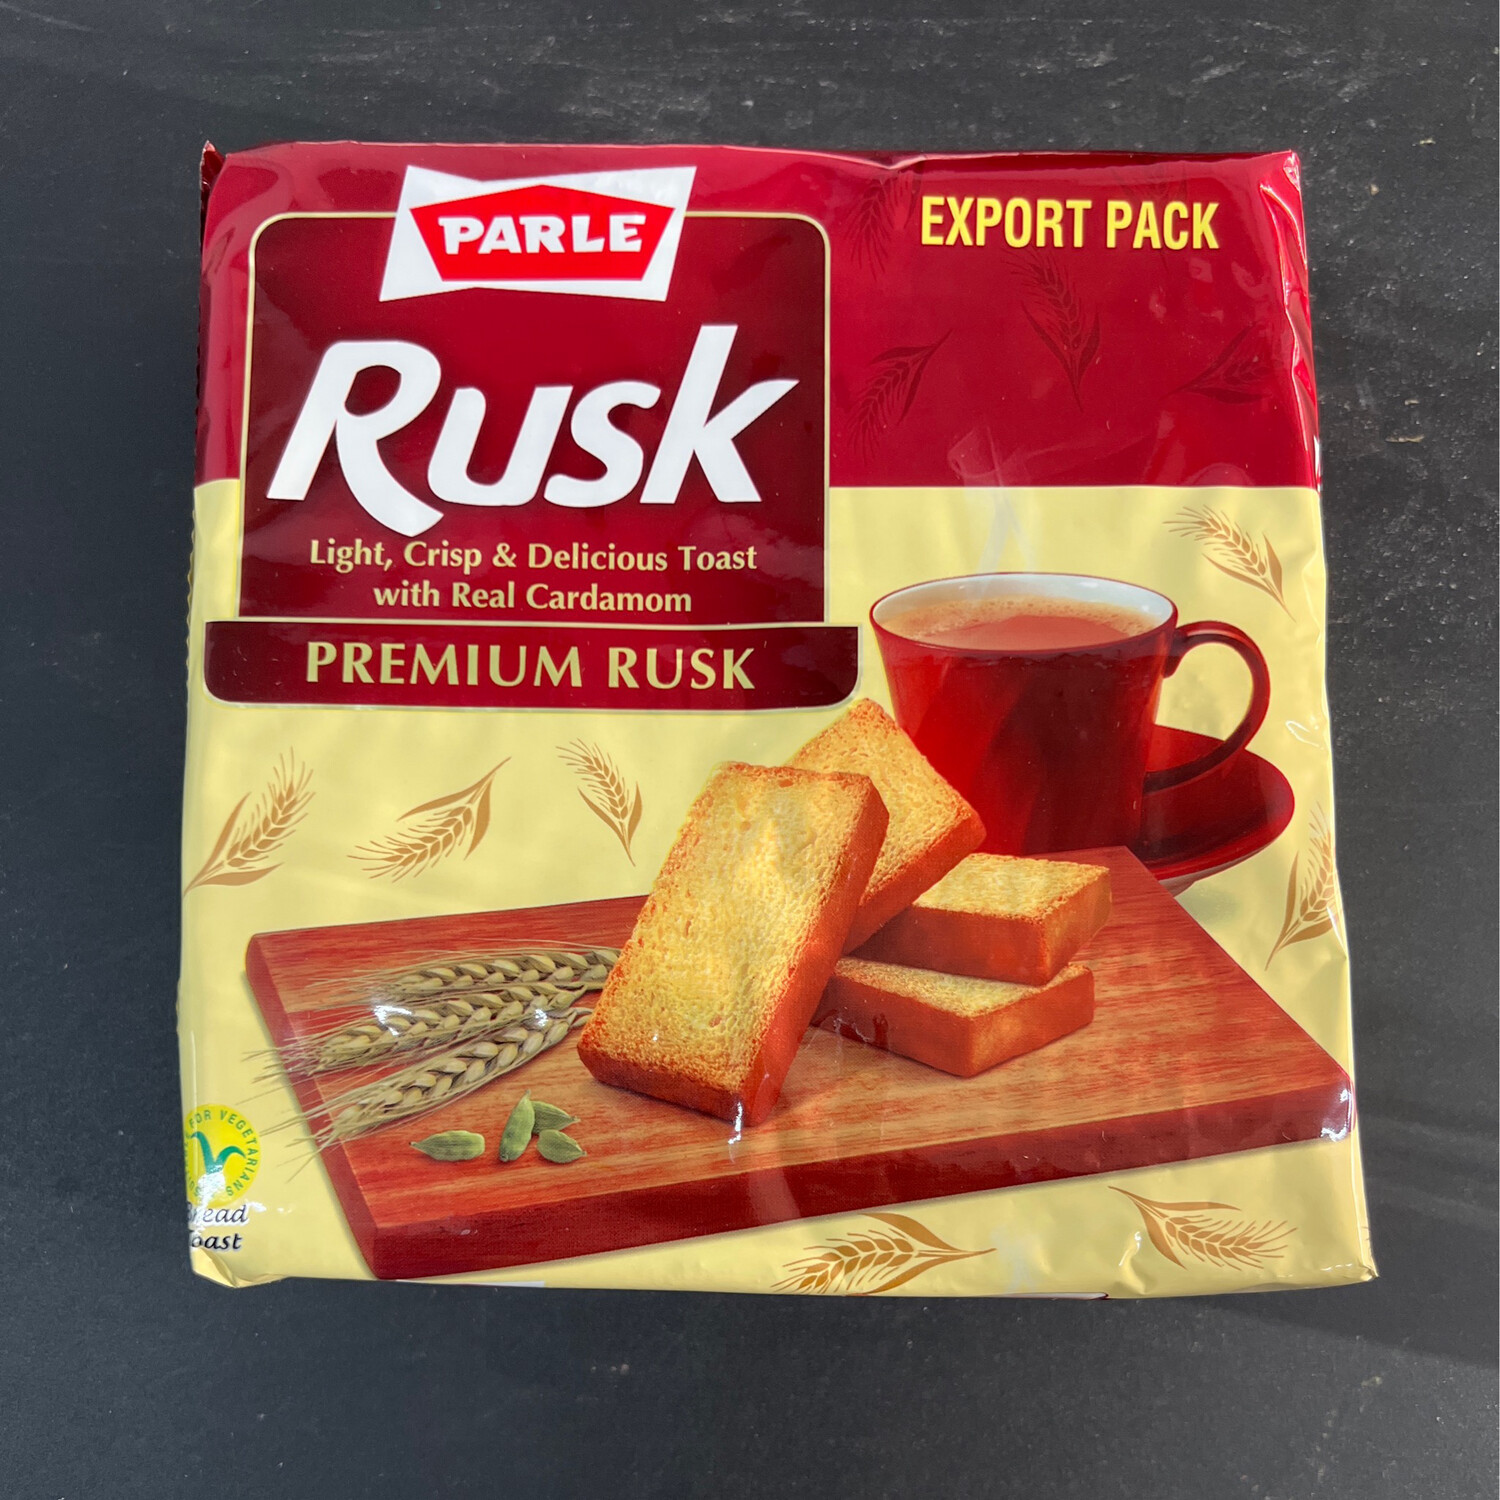 Parle Premium Rusk - Light, Crisp & Delicious Toast with real Cardamom 300g